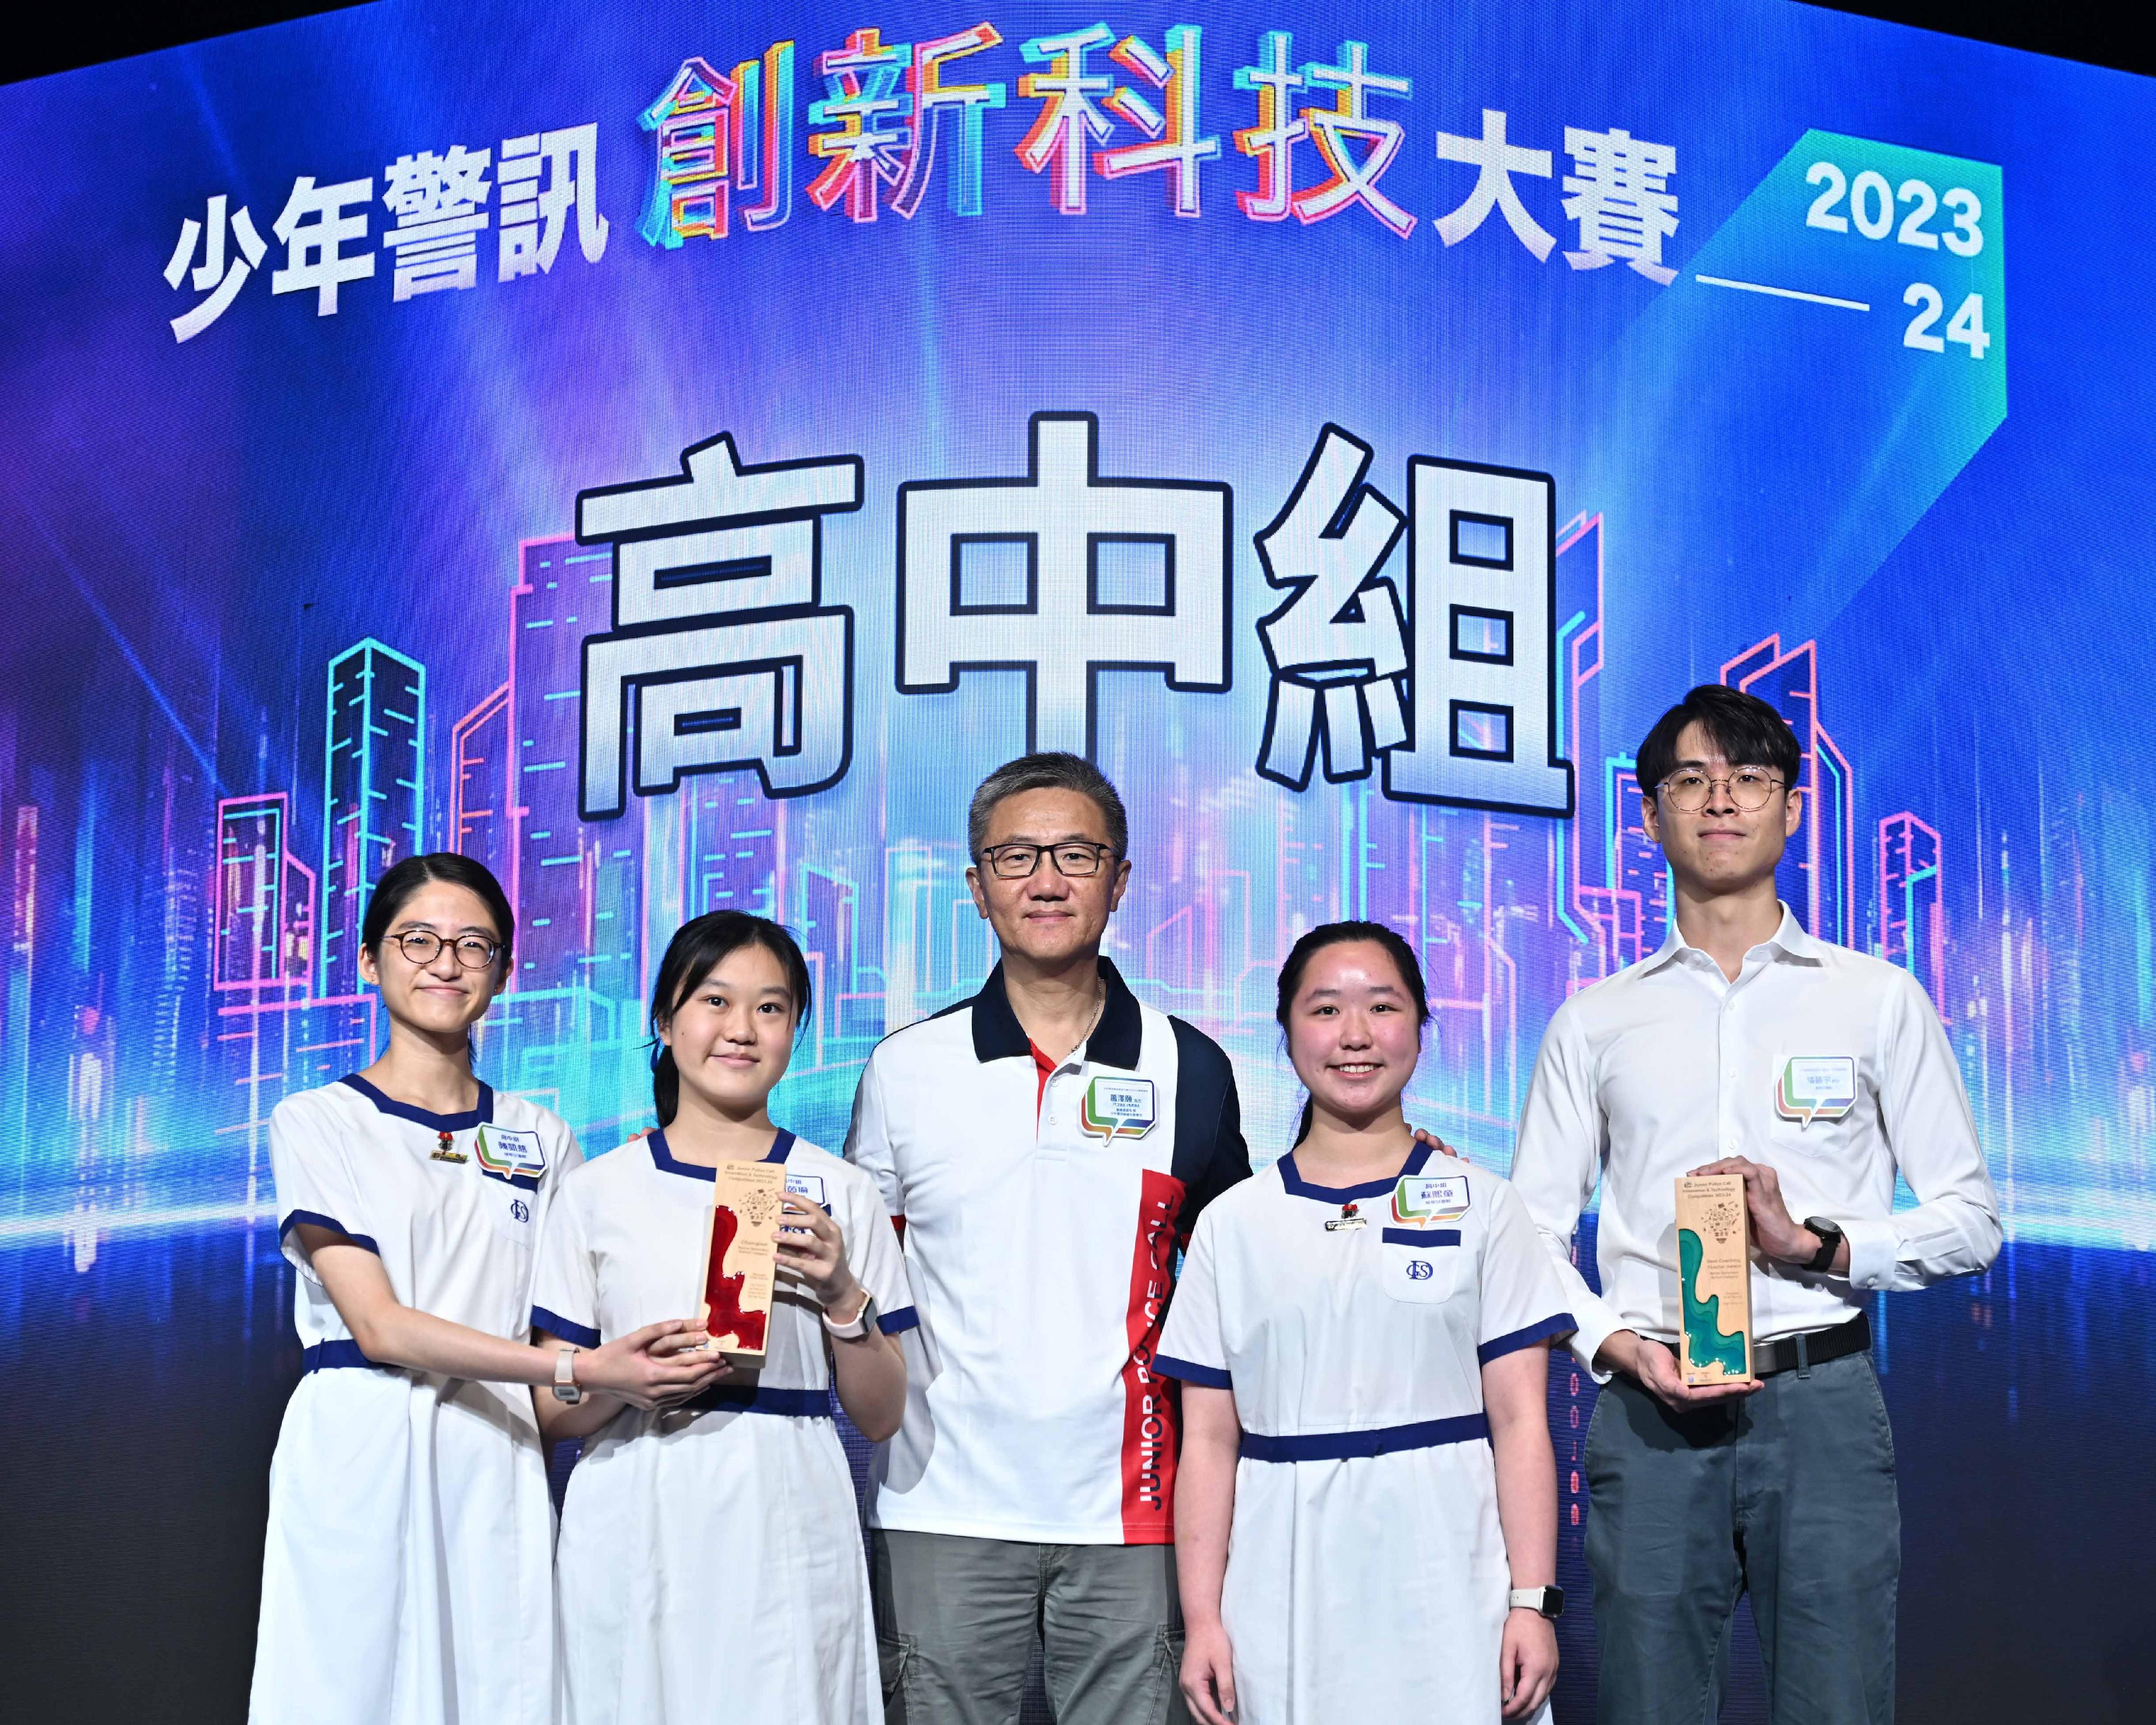 The JPC Innovation and Technology Competition 2023-24, organised by the Junior Police Call, held its award presentation ceremony at the Hong Kong Convention and Exhibition Centre today (May 11). Photo shows the Commissioner of Police, Mr Siu Chak-yee (centre), presenting awards to the champion of senior secondary category.